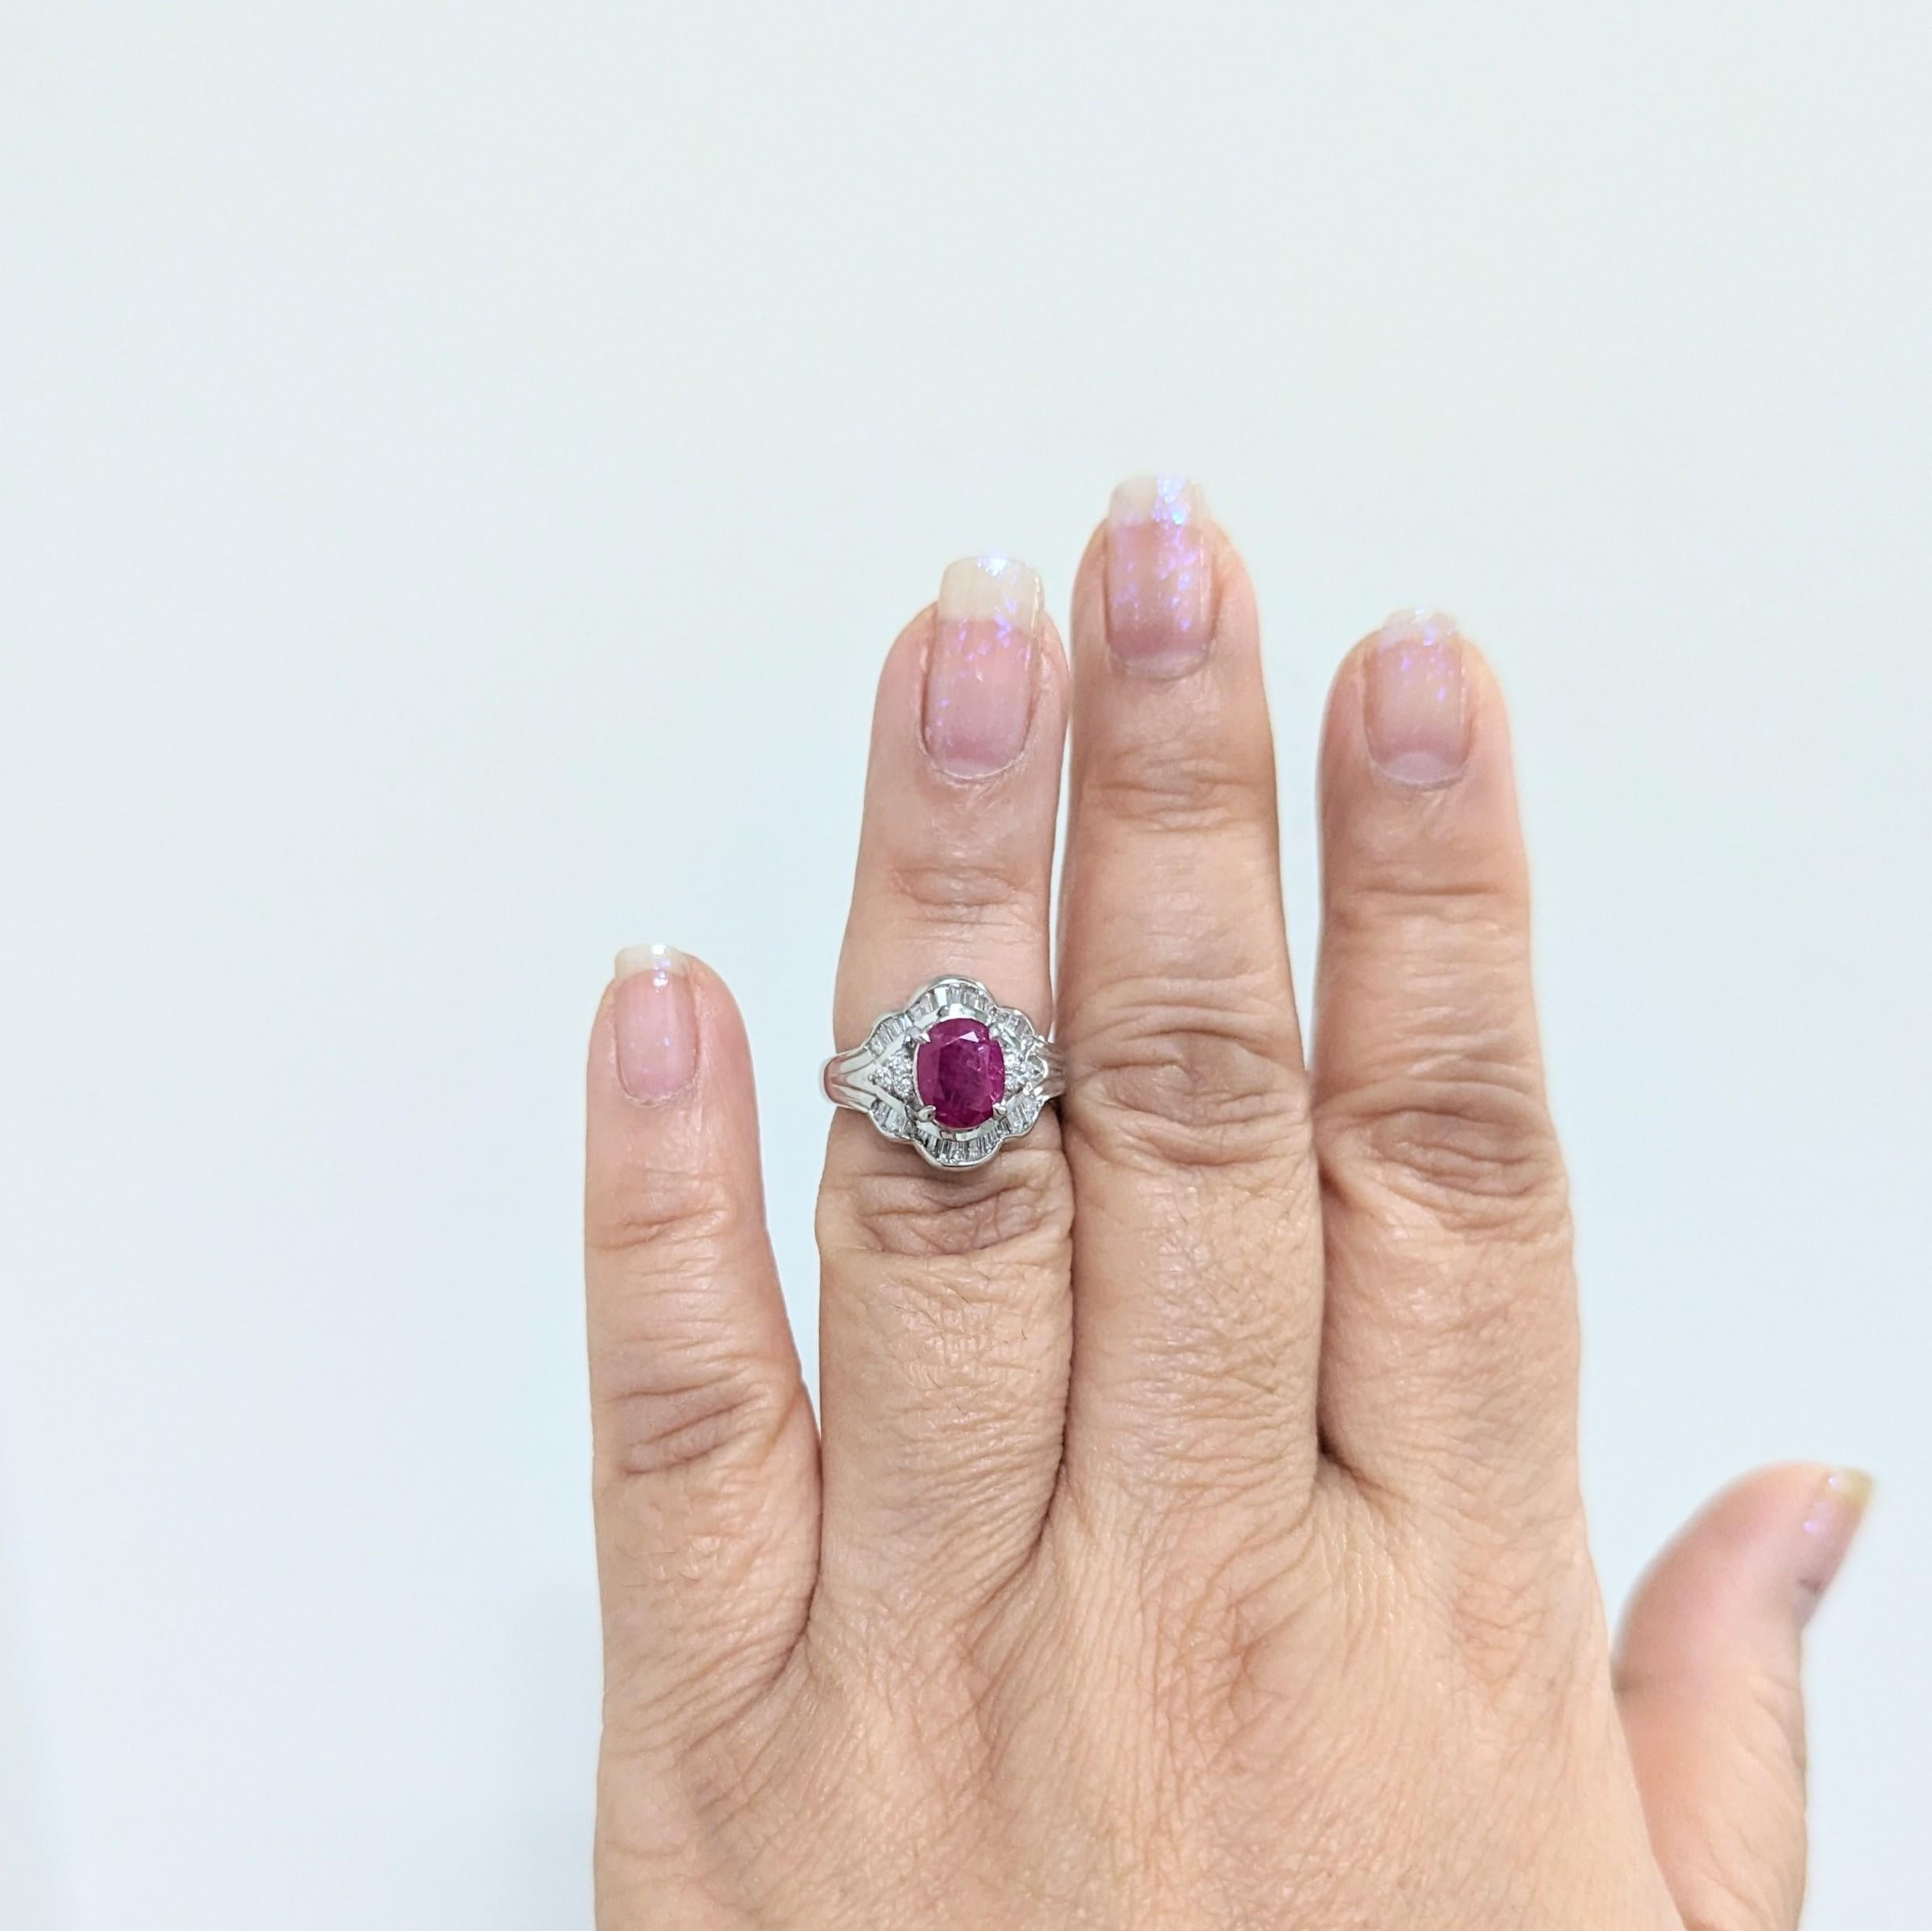 Beautiful 2.23 ct. ruby oval with 0.41 ct. good quality white diamond baguettes and rounds.  Handmade in platinum.  Ring size 5.25.